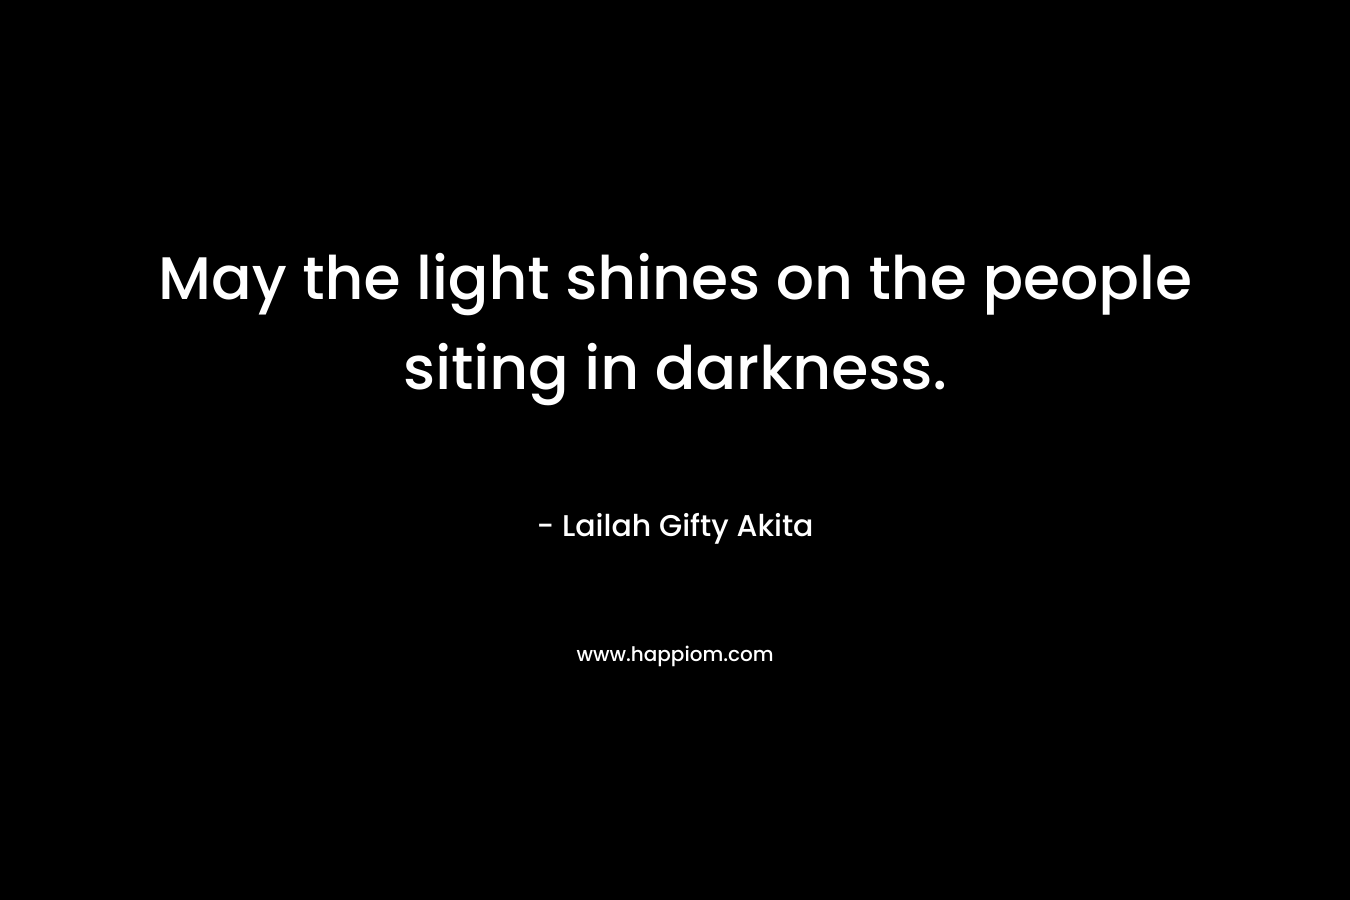 May the light shines on the people siting in darkness.